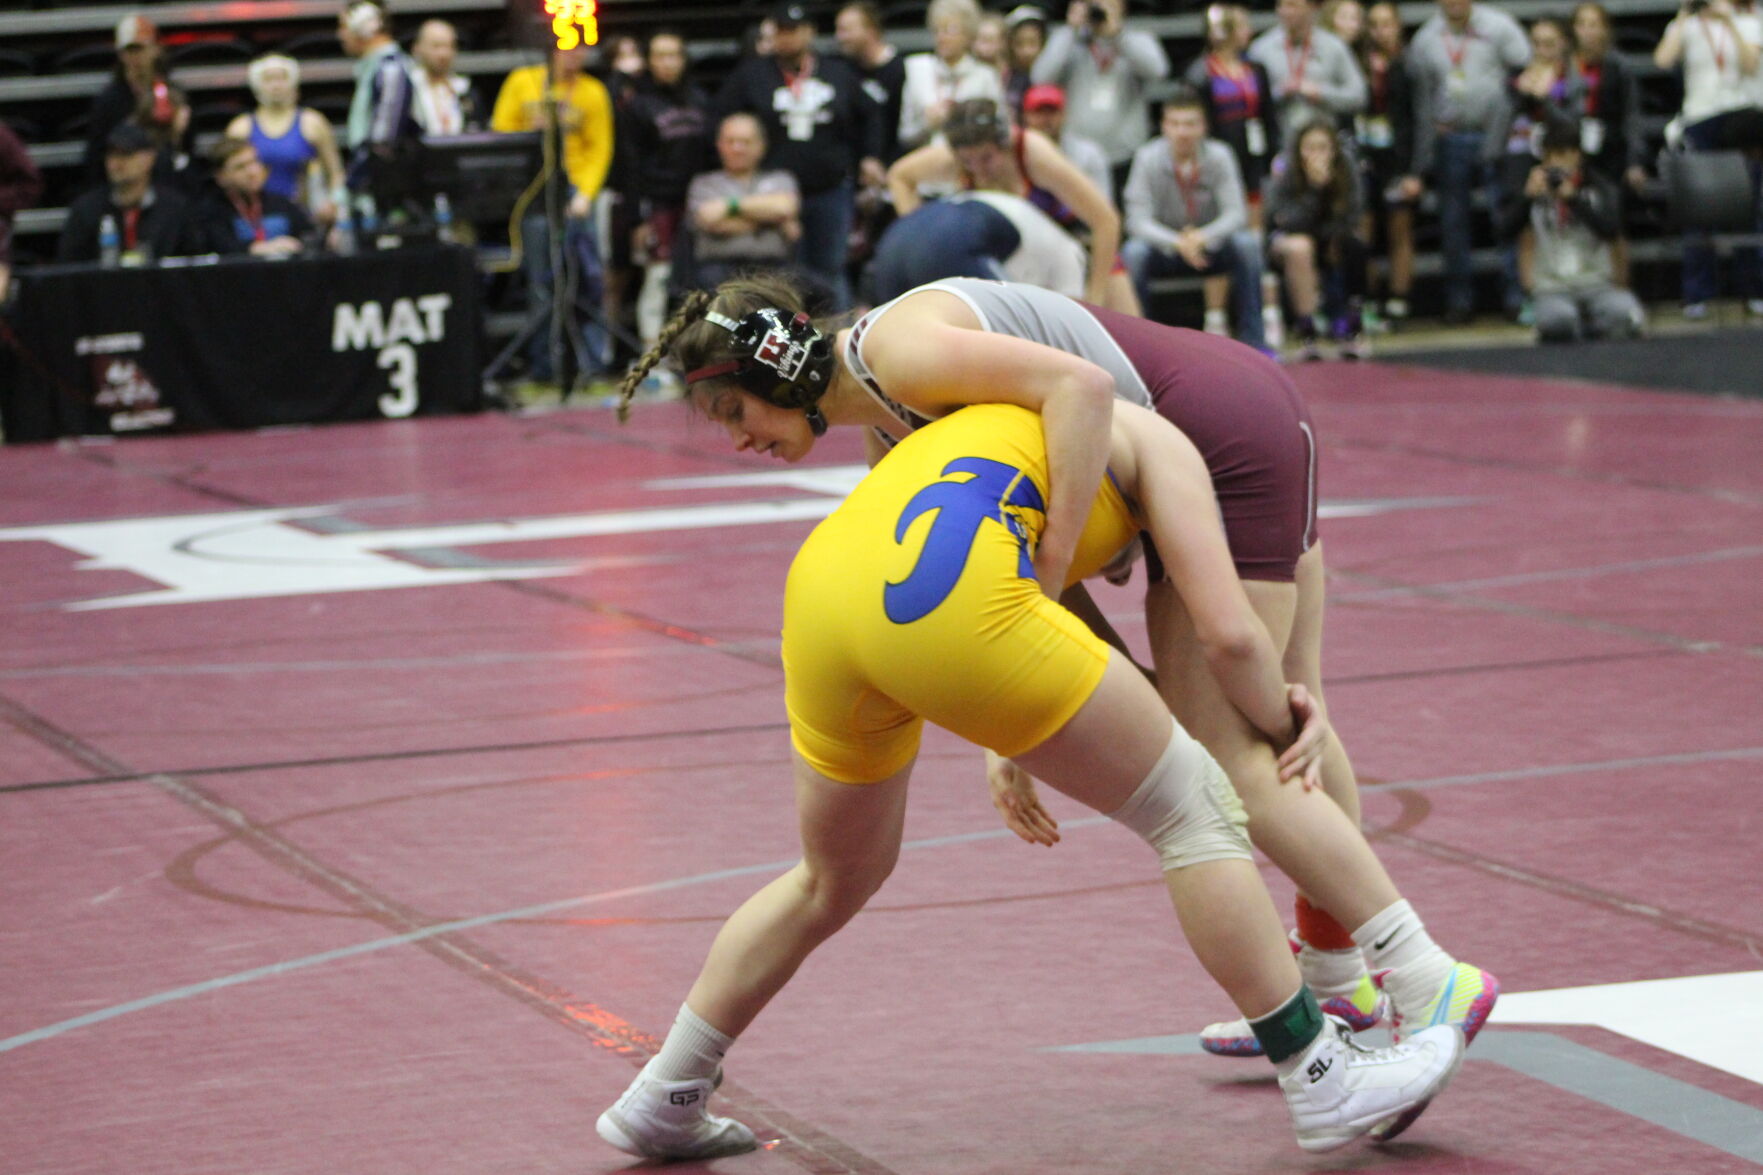 WIAA state wrestling notebook Vetsch leads first group of girls qualifiers